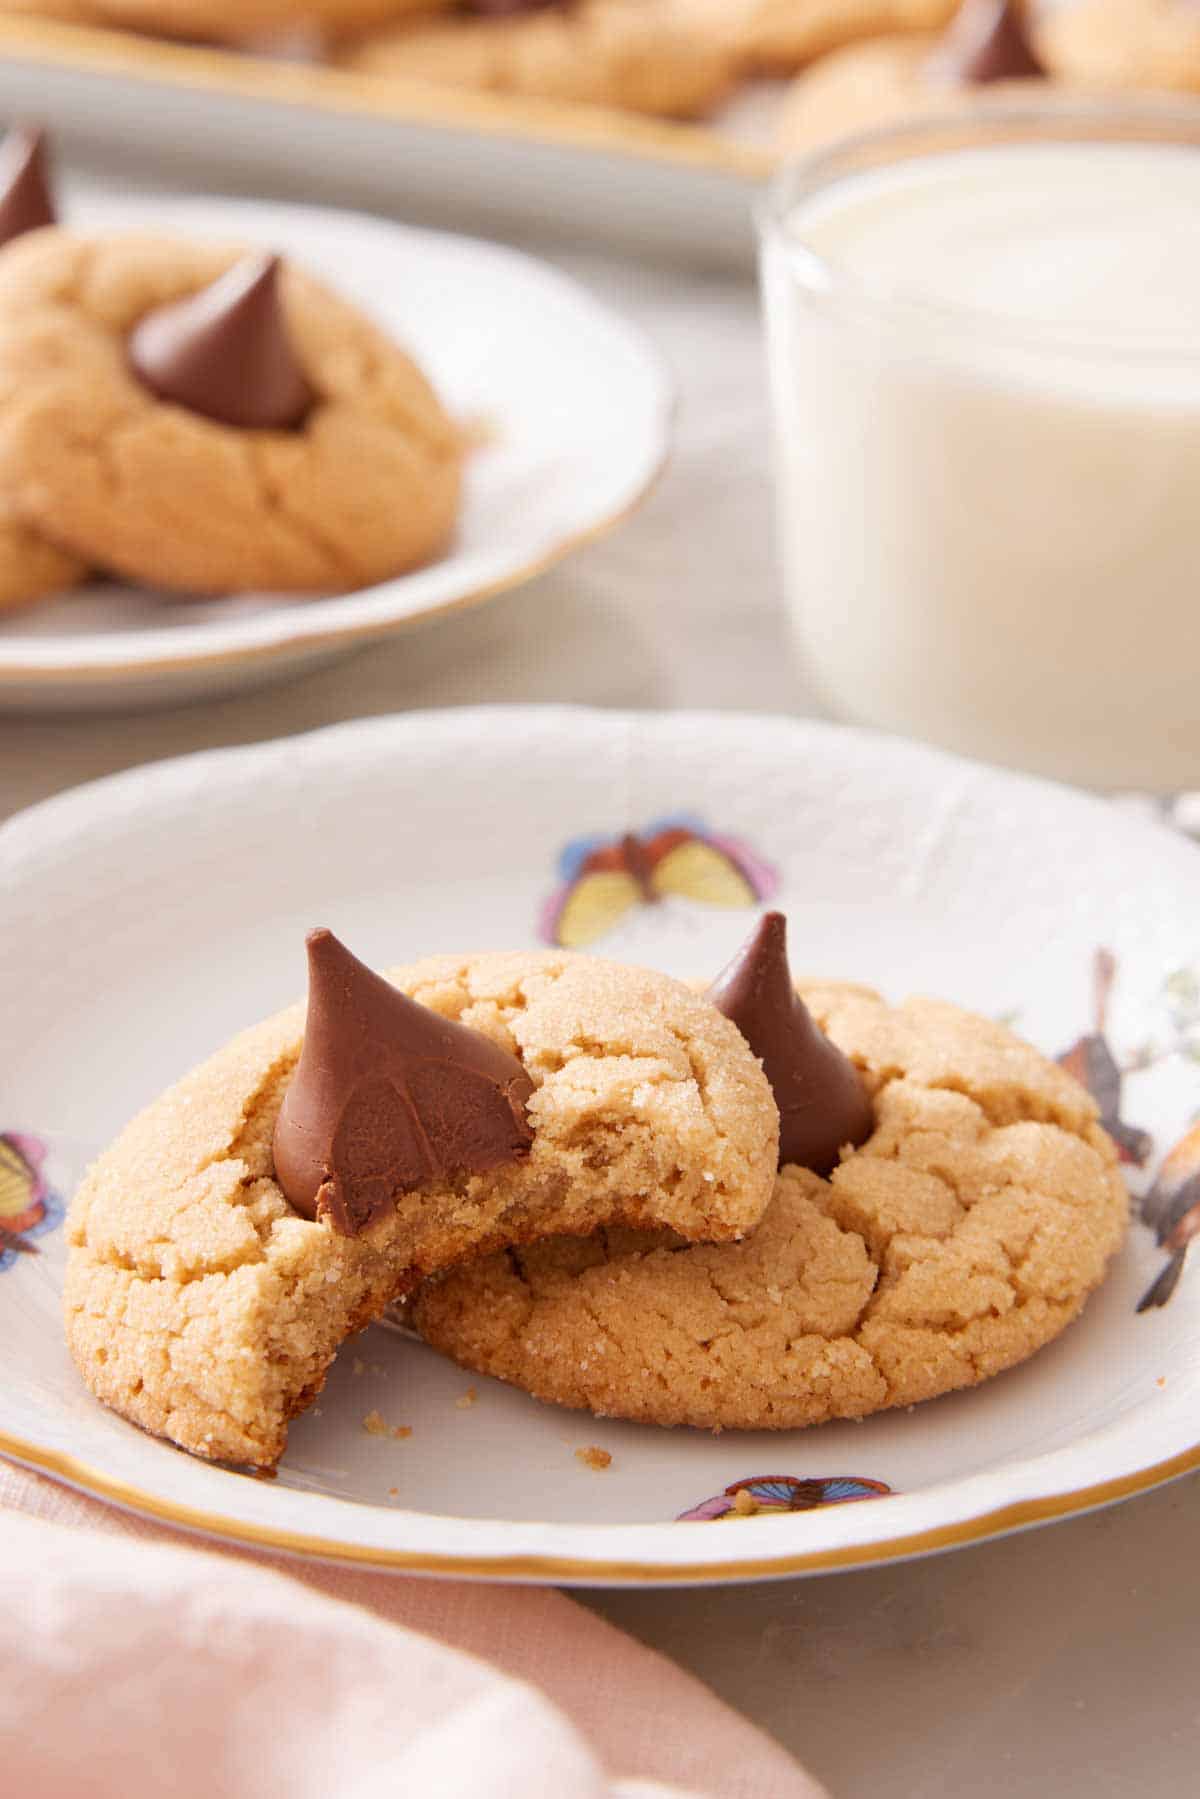 A plate with two peanut butter blossoms. One has a bite taken out of it.